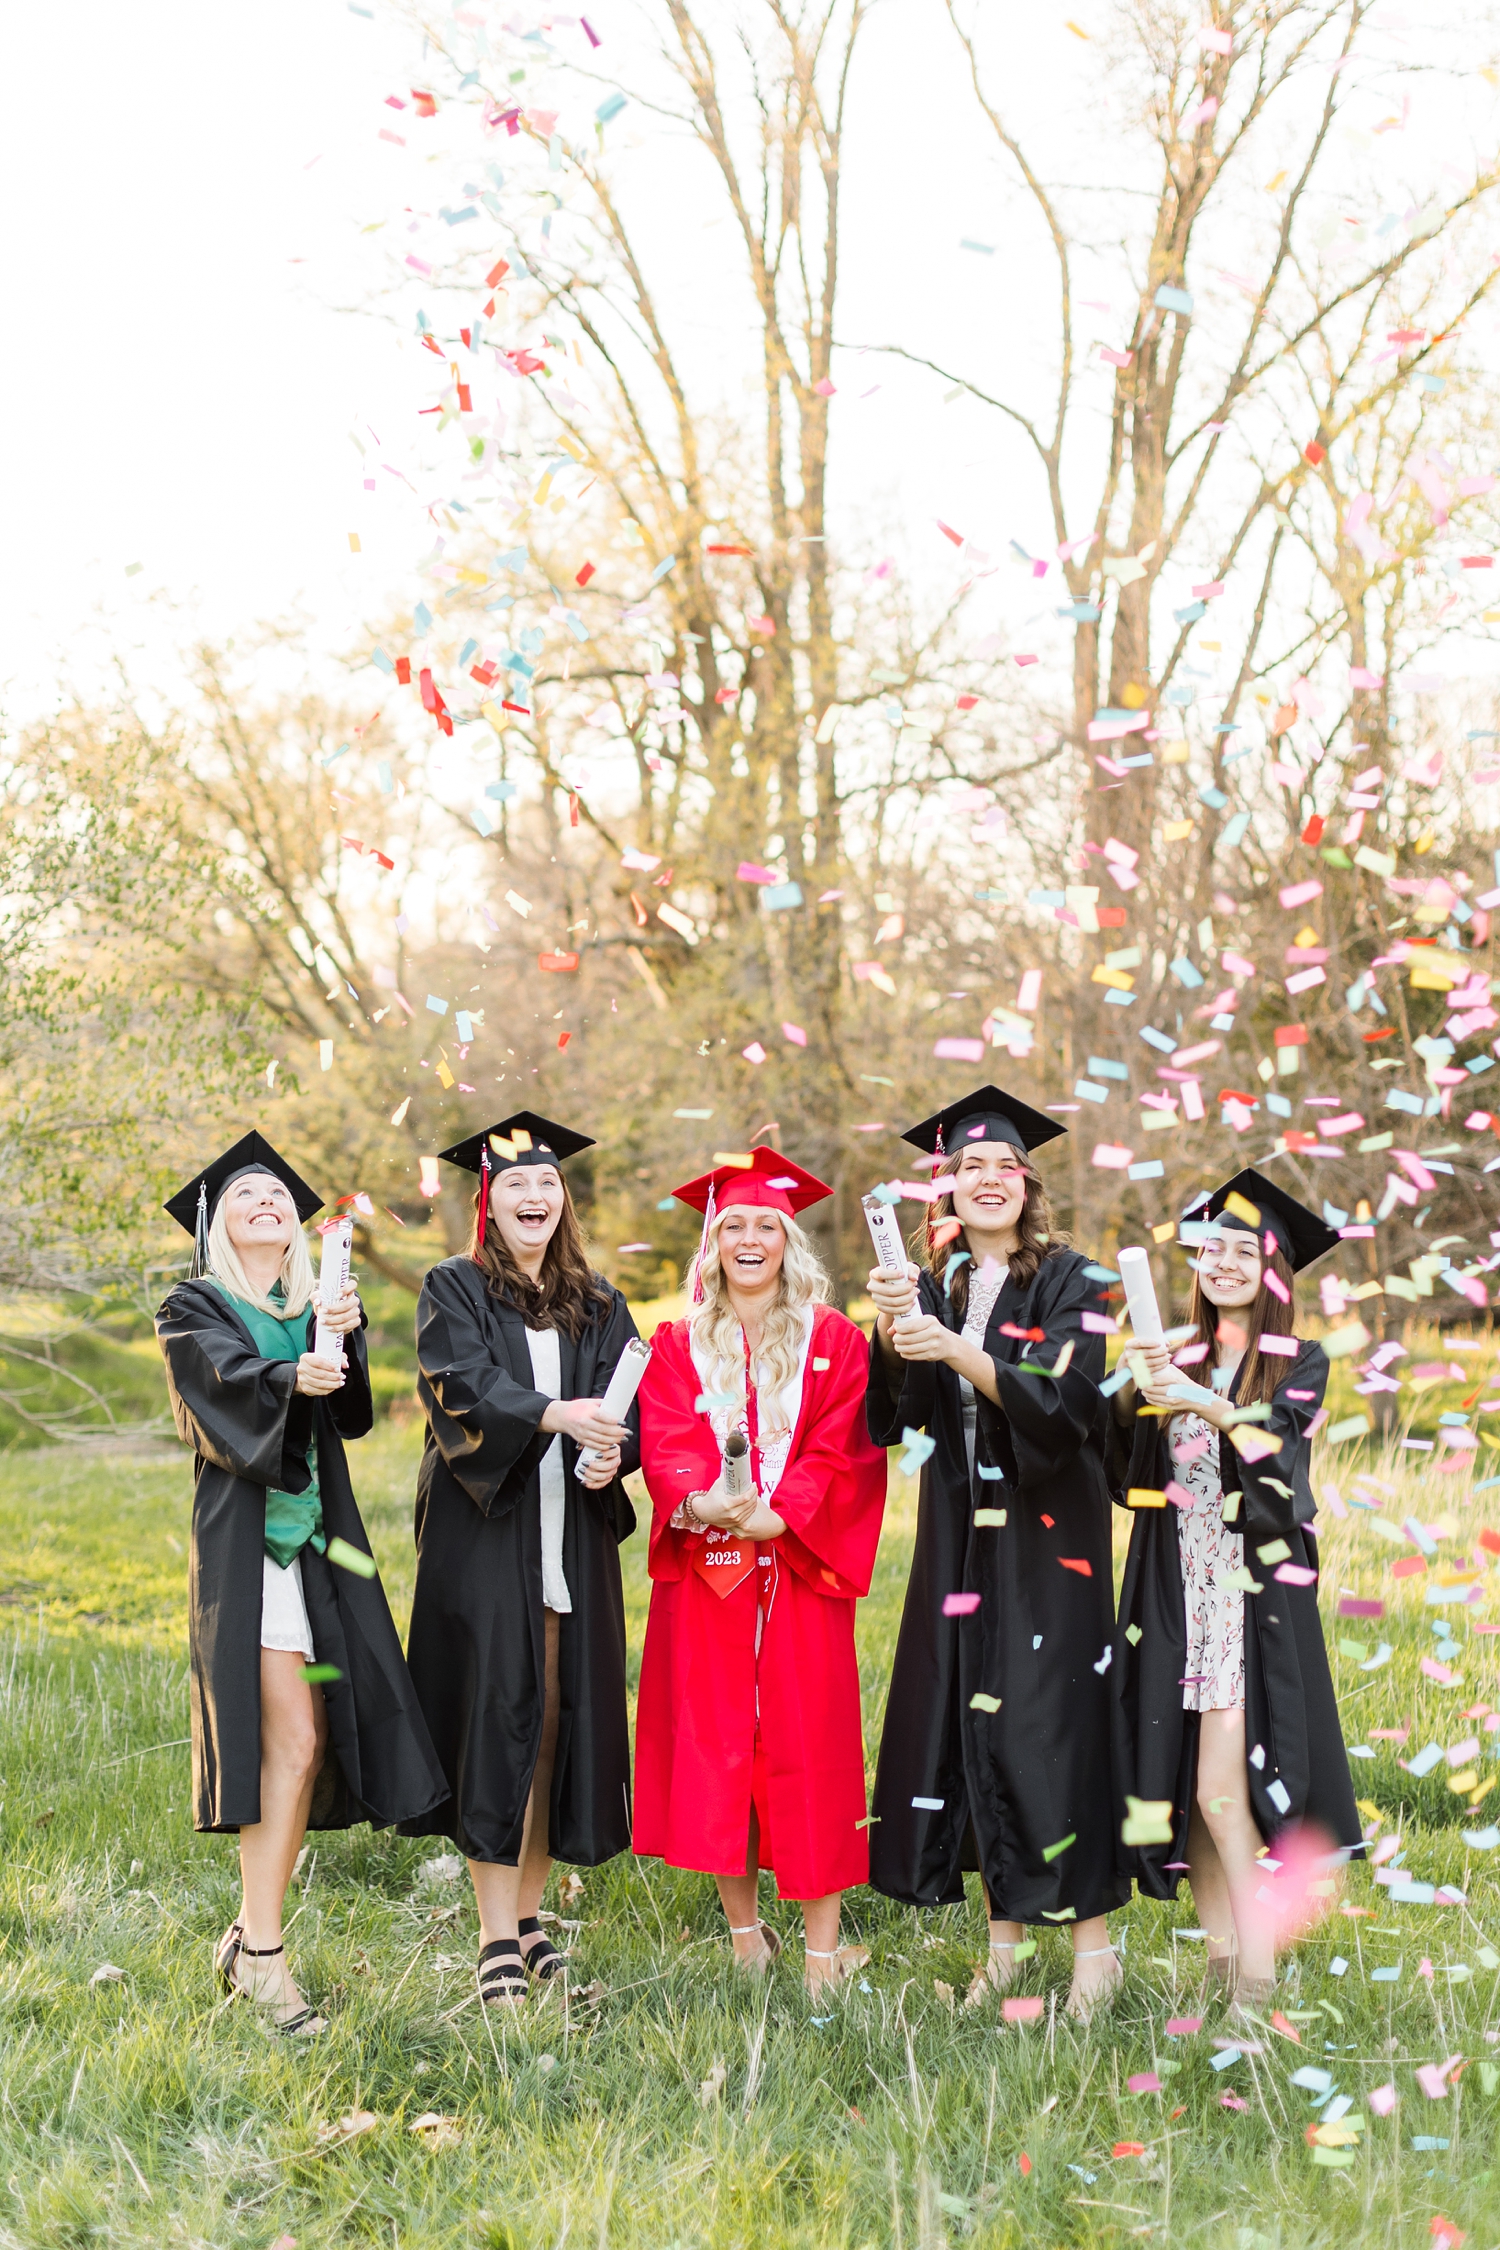 2023 CBS Senior Spokesmodels pop off confetti canons during a cap and gown photoshoot | CB Studio